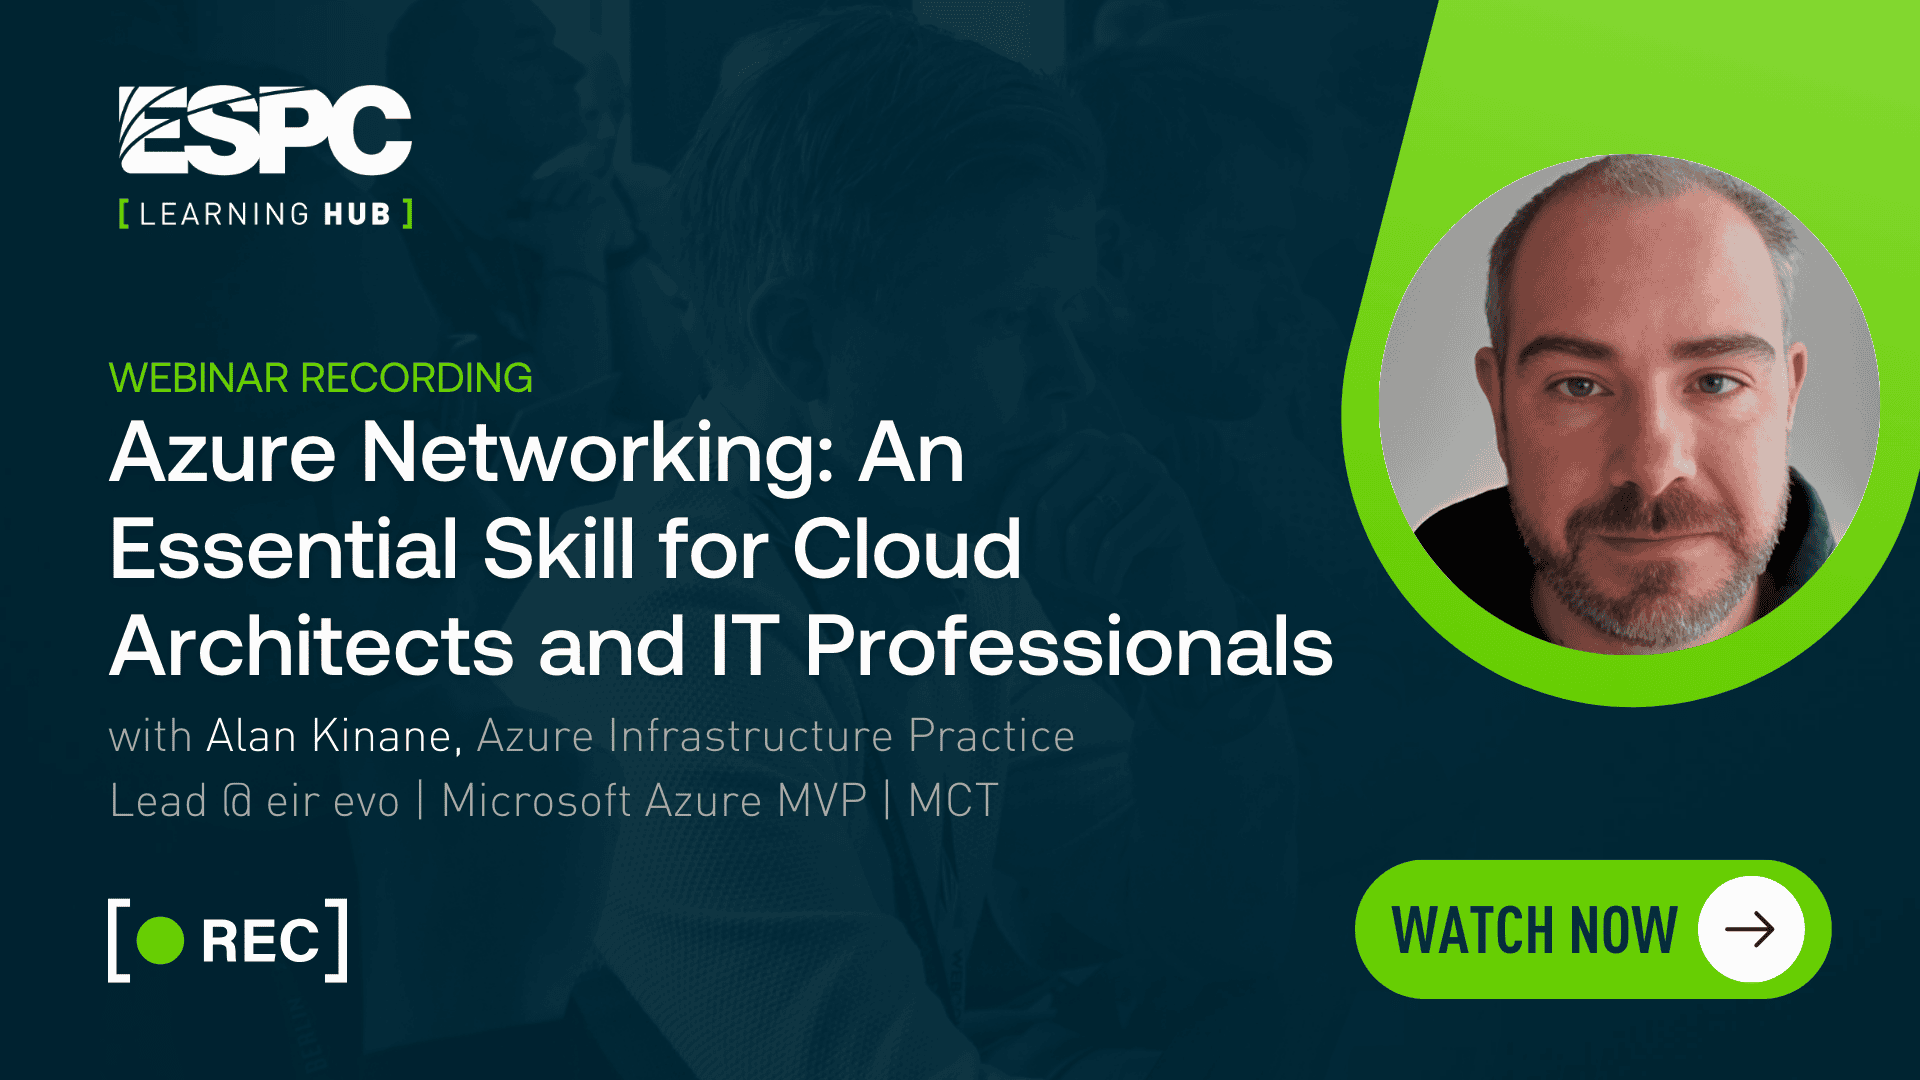 Azure Networking: An Essential Skill for Cloud Architects and IT Professionals